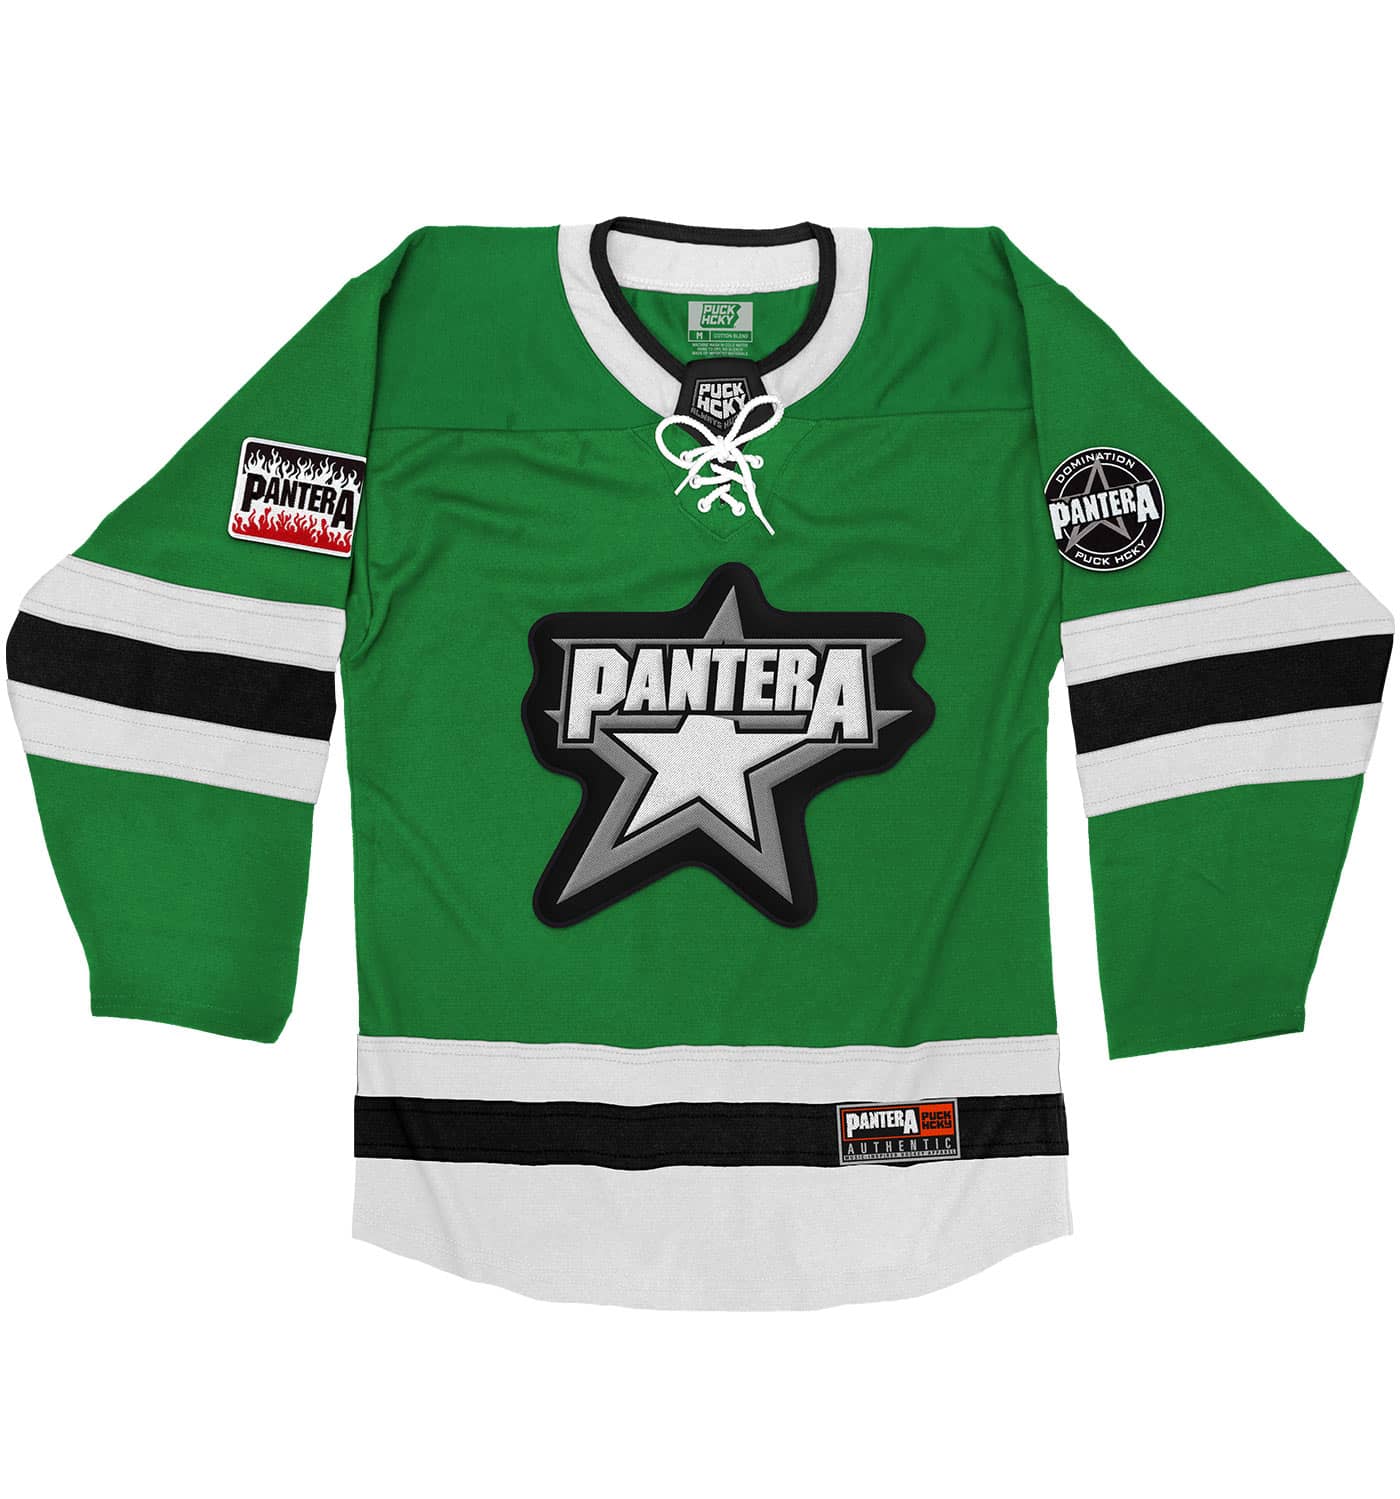 PANTERA 'A NEW LEVEL' deluxe hockey jersey in kelly, white, and black front view